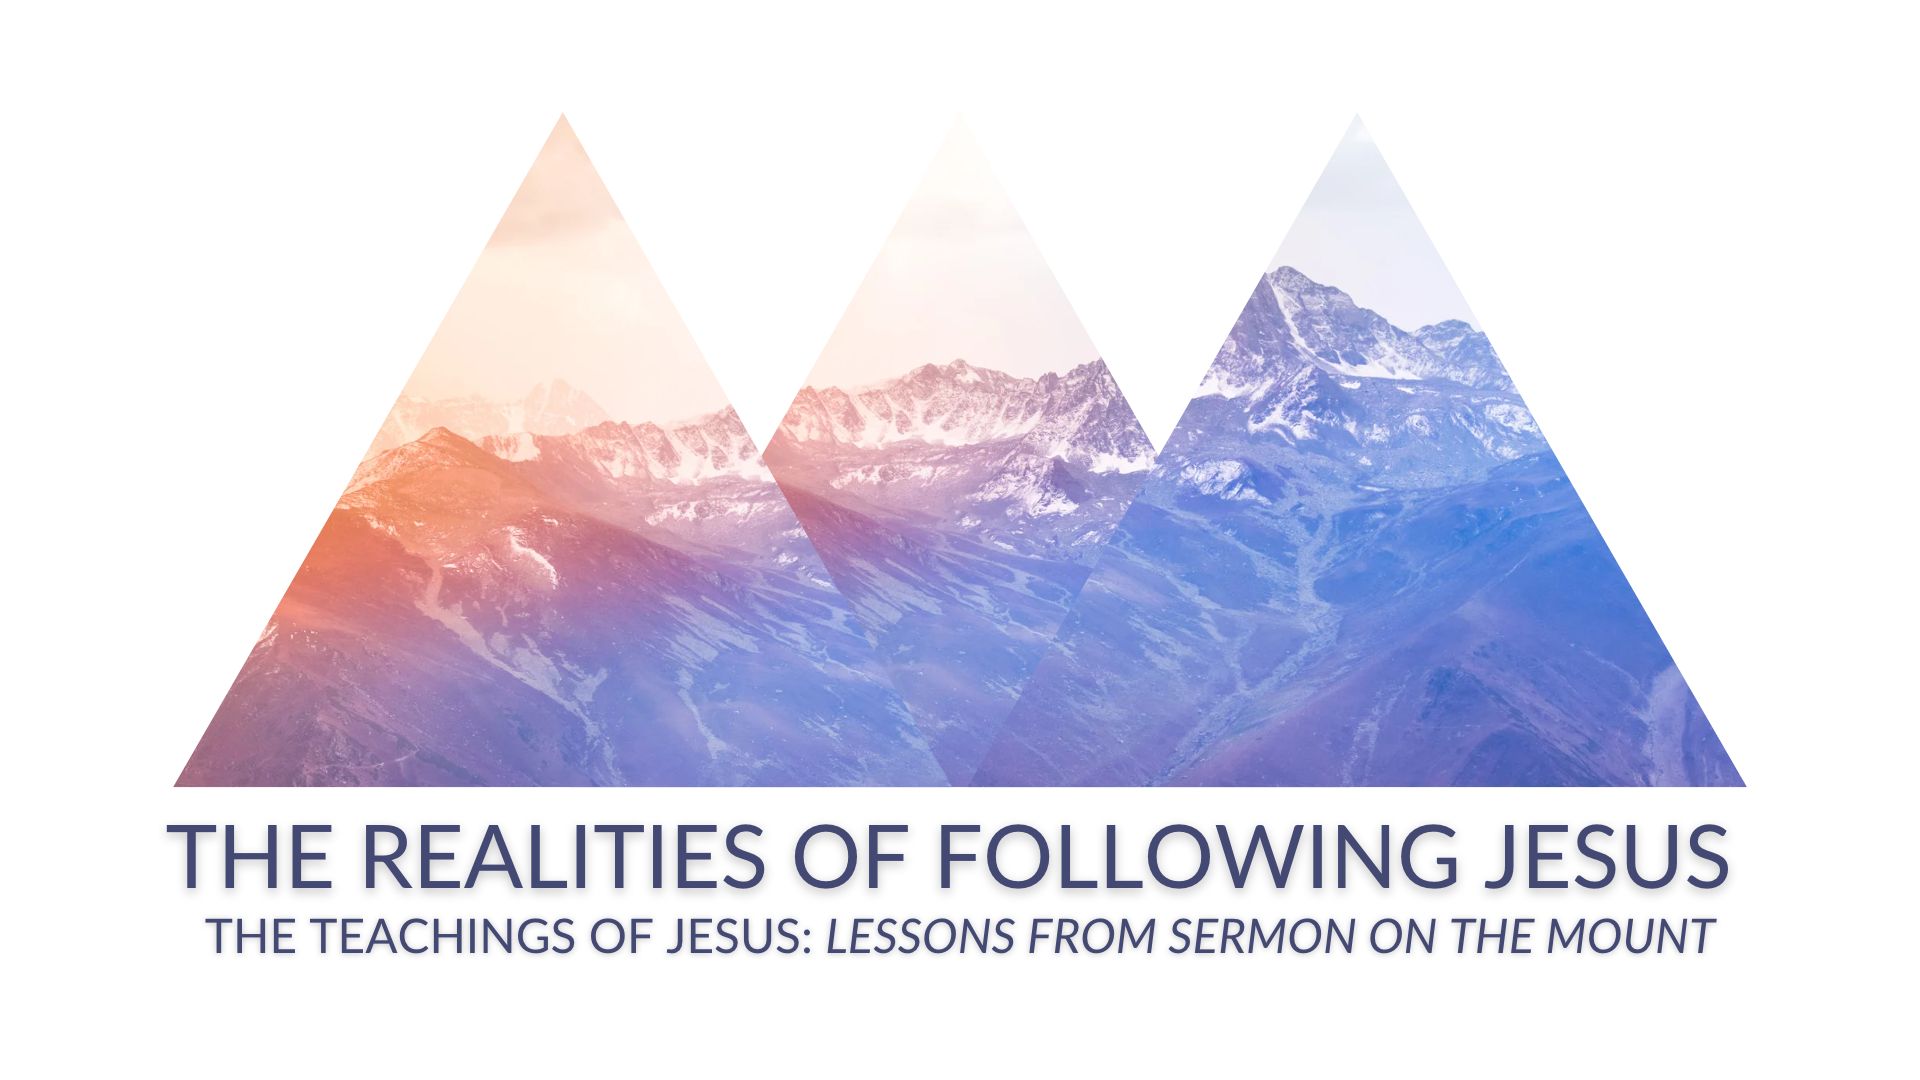 THE REALITIES OF FOLLOWING JESUS - The Teachings of Jesus: Lessons from the Sermon on the Mount